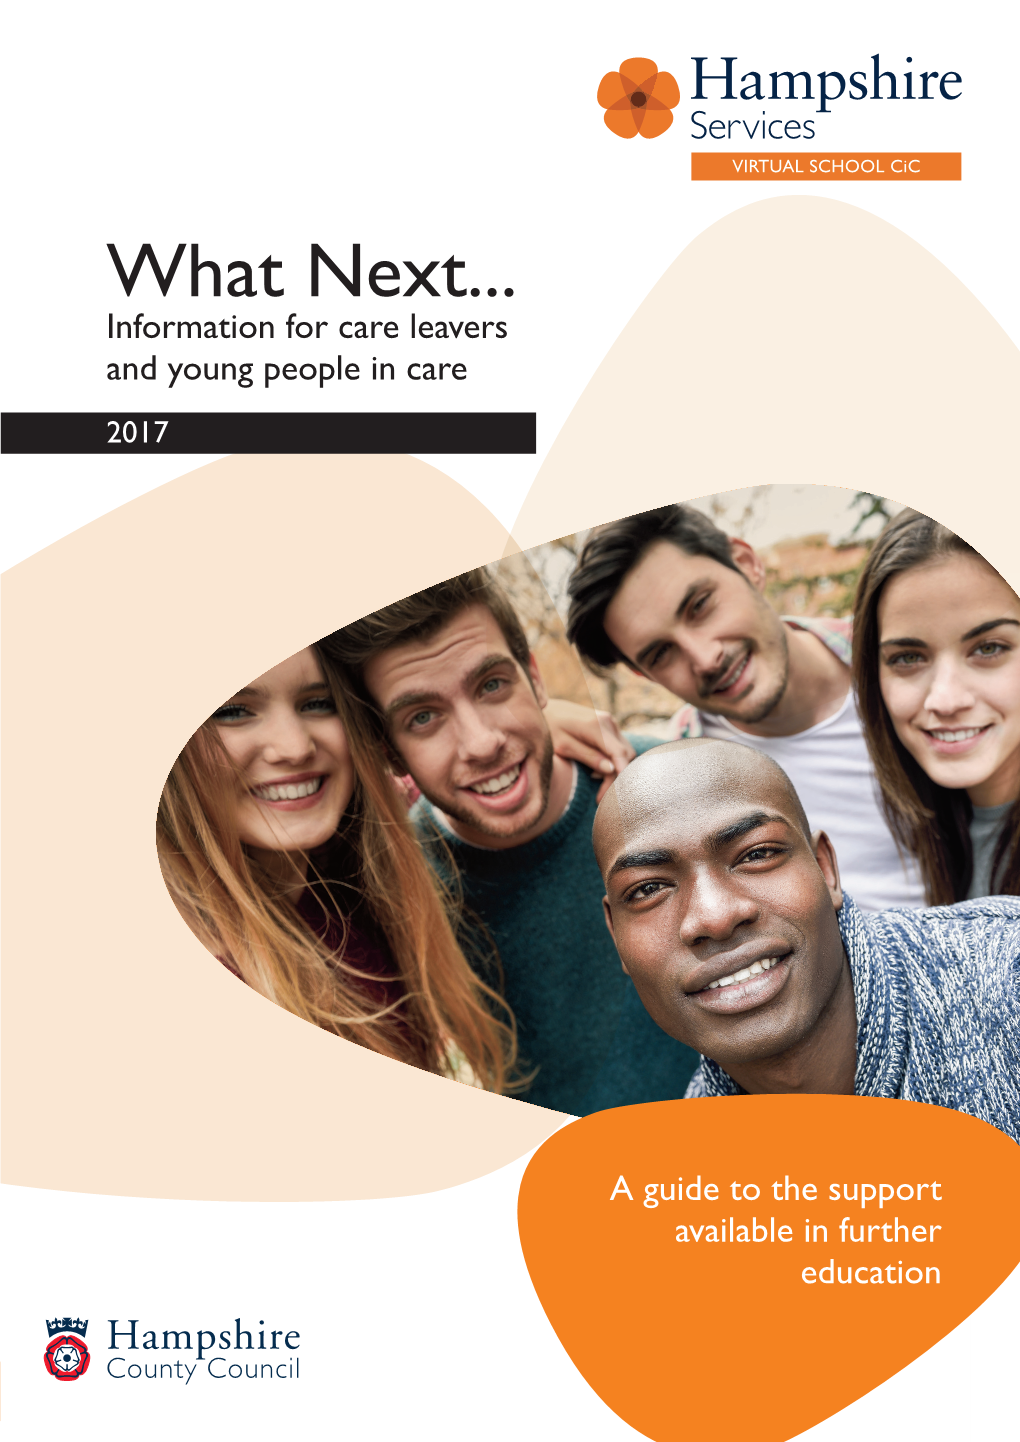 What Next... Information for Care Leavers and Young People in Care 2017